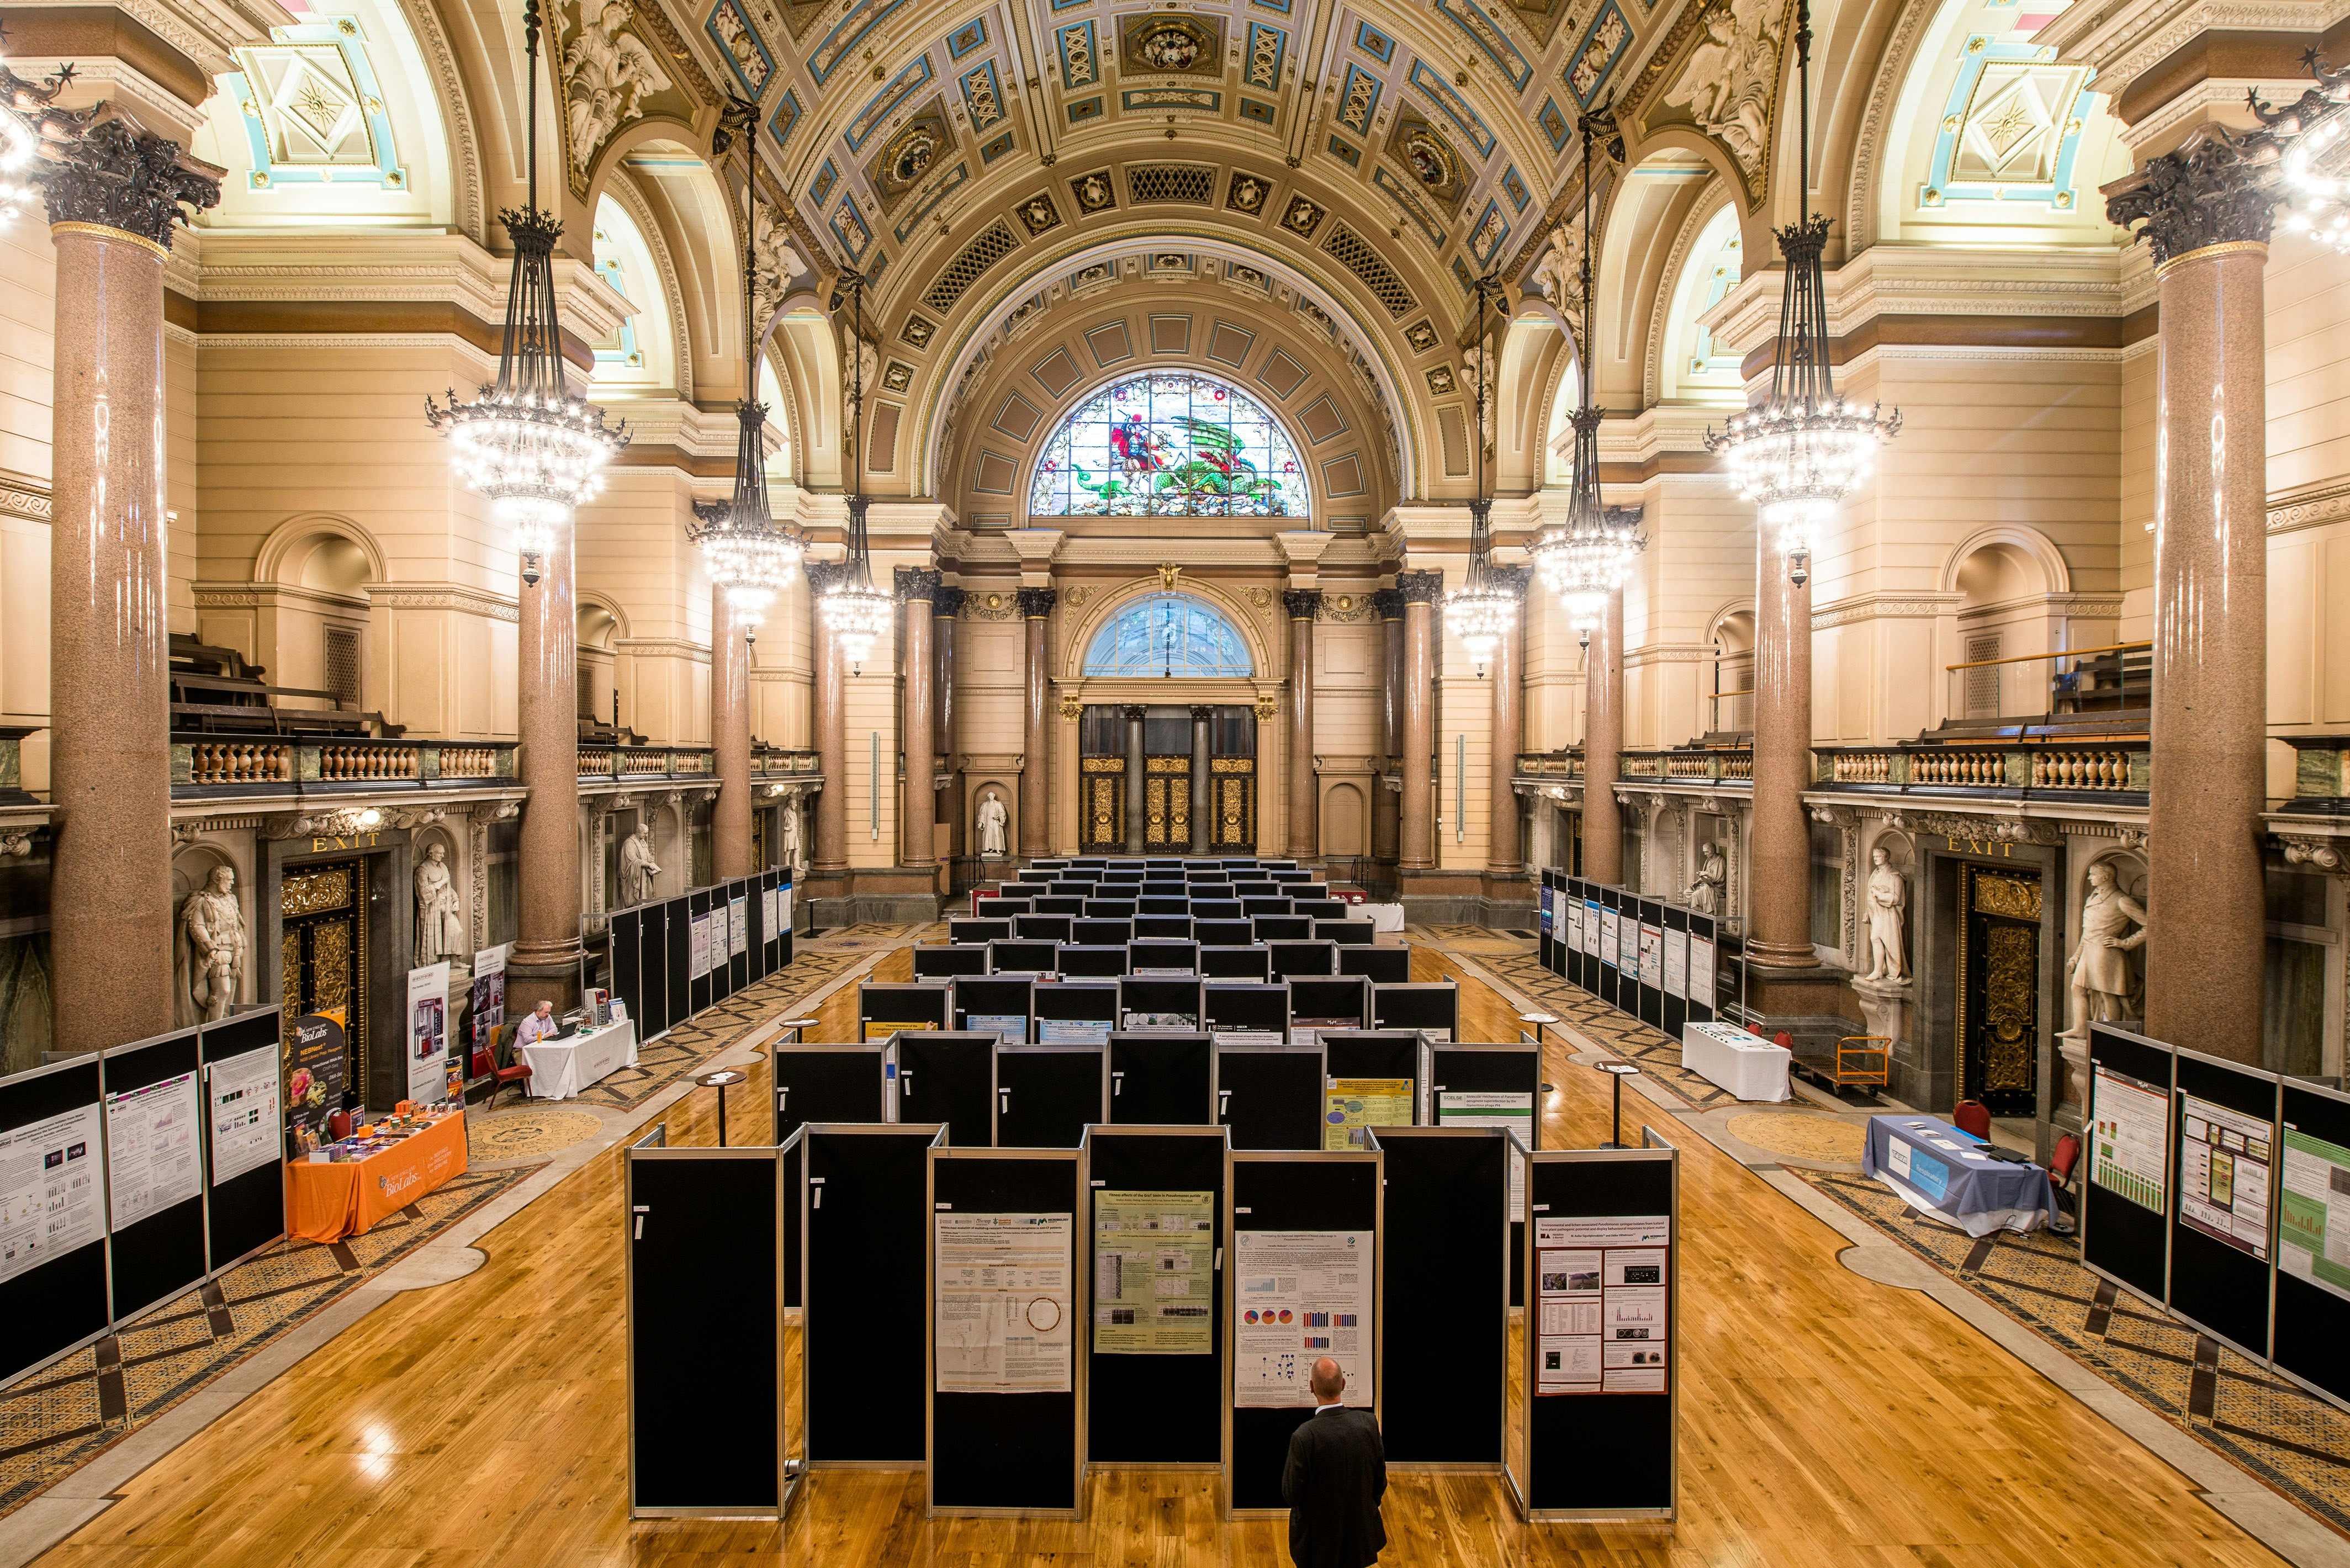 St George's Hall - The Great Hall image 1